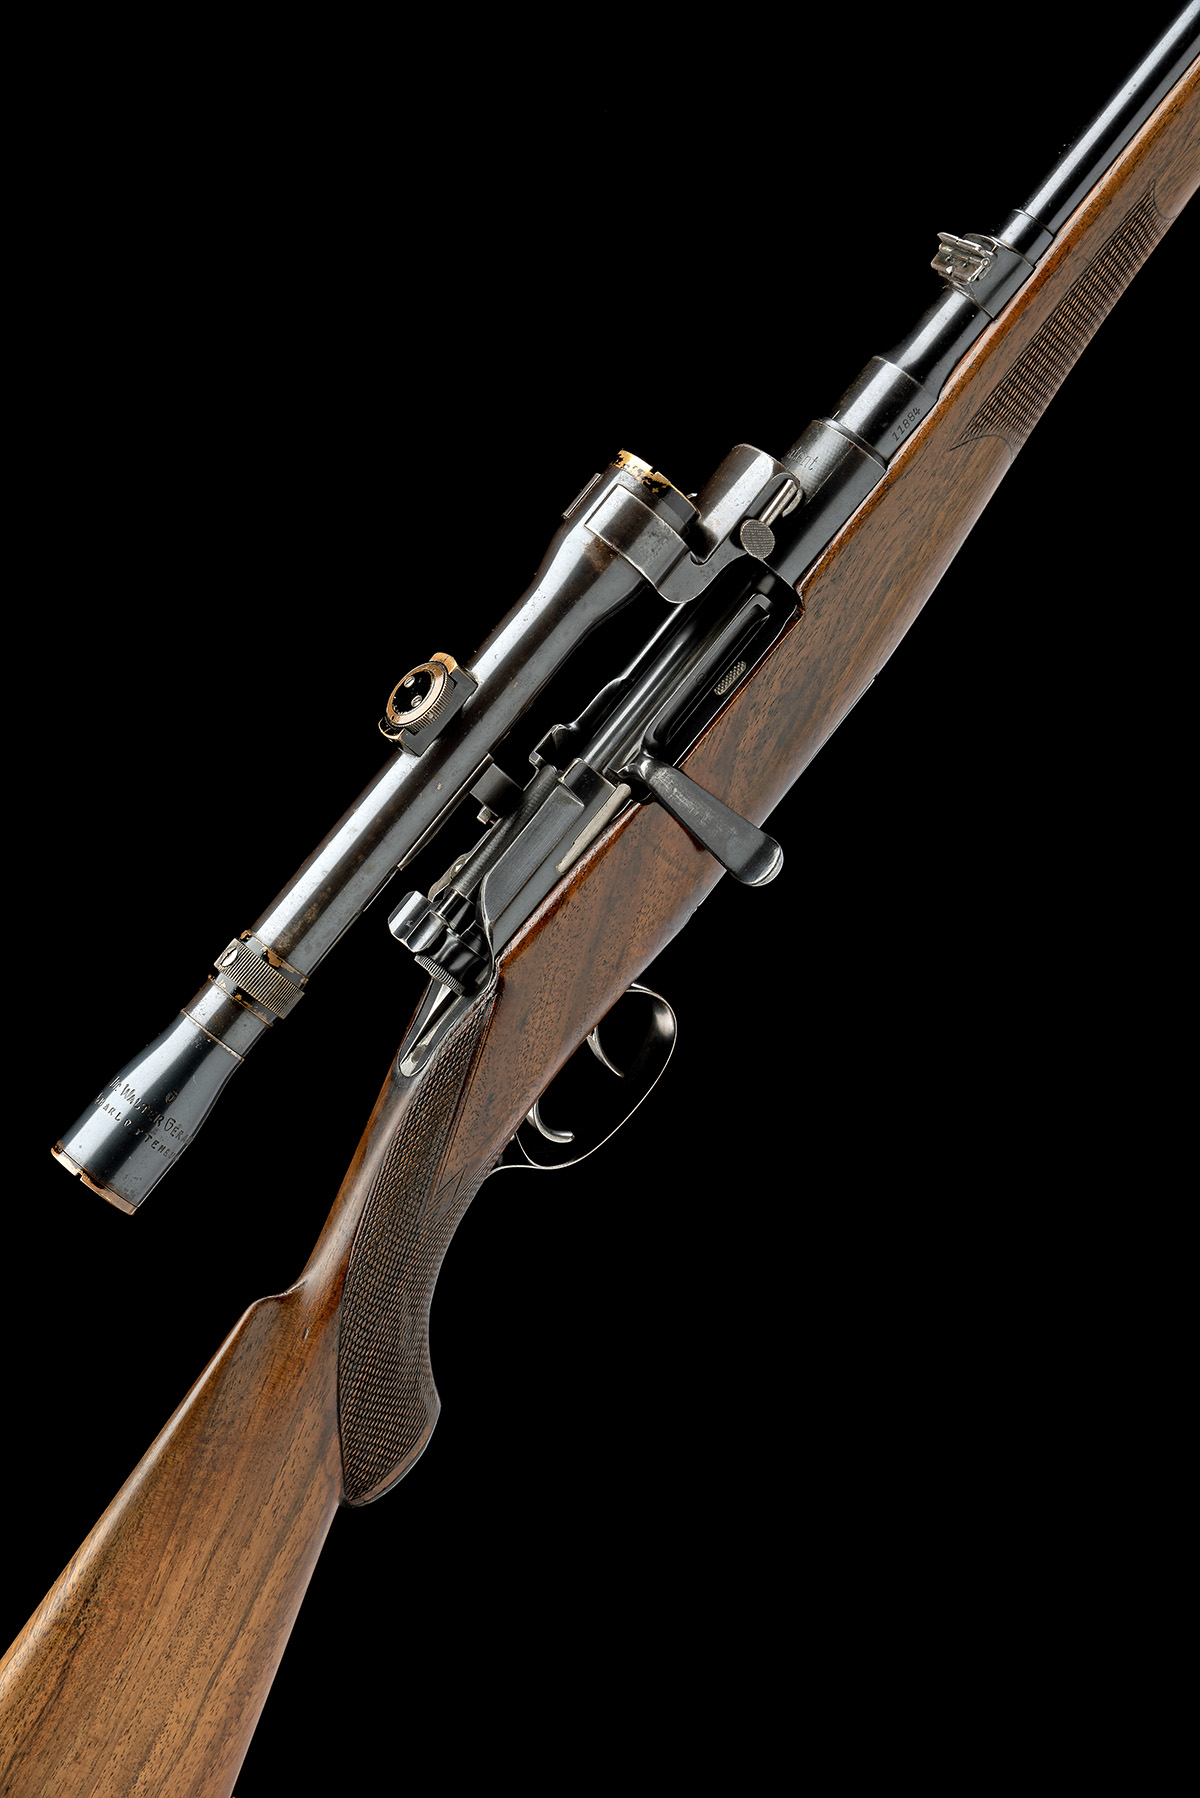 AN 8X56 M/S 'MODEL 1908' BOLT-MAGAZINE STUTZEN SPORTING RIFLE BY STEYR, serial no. 11884, for